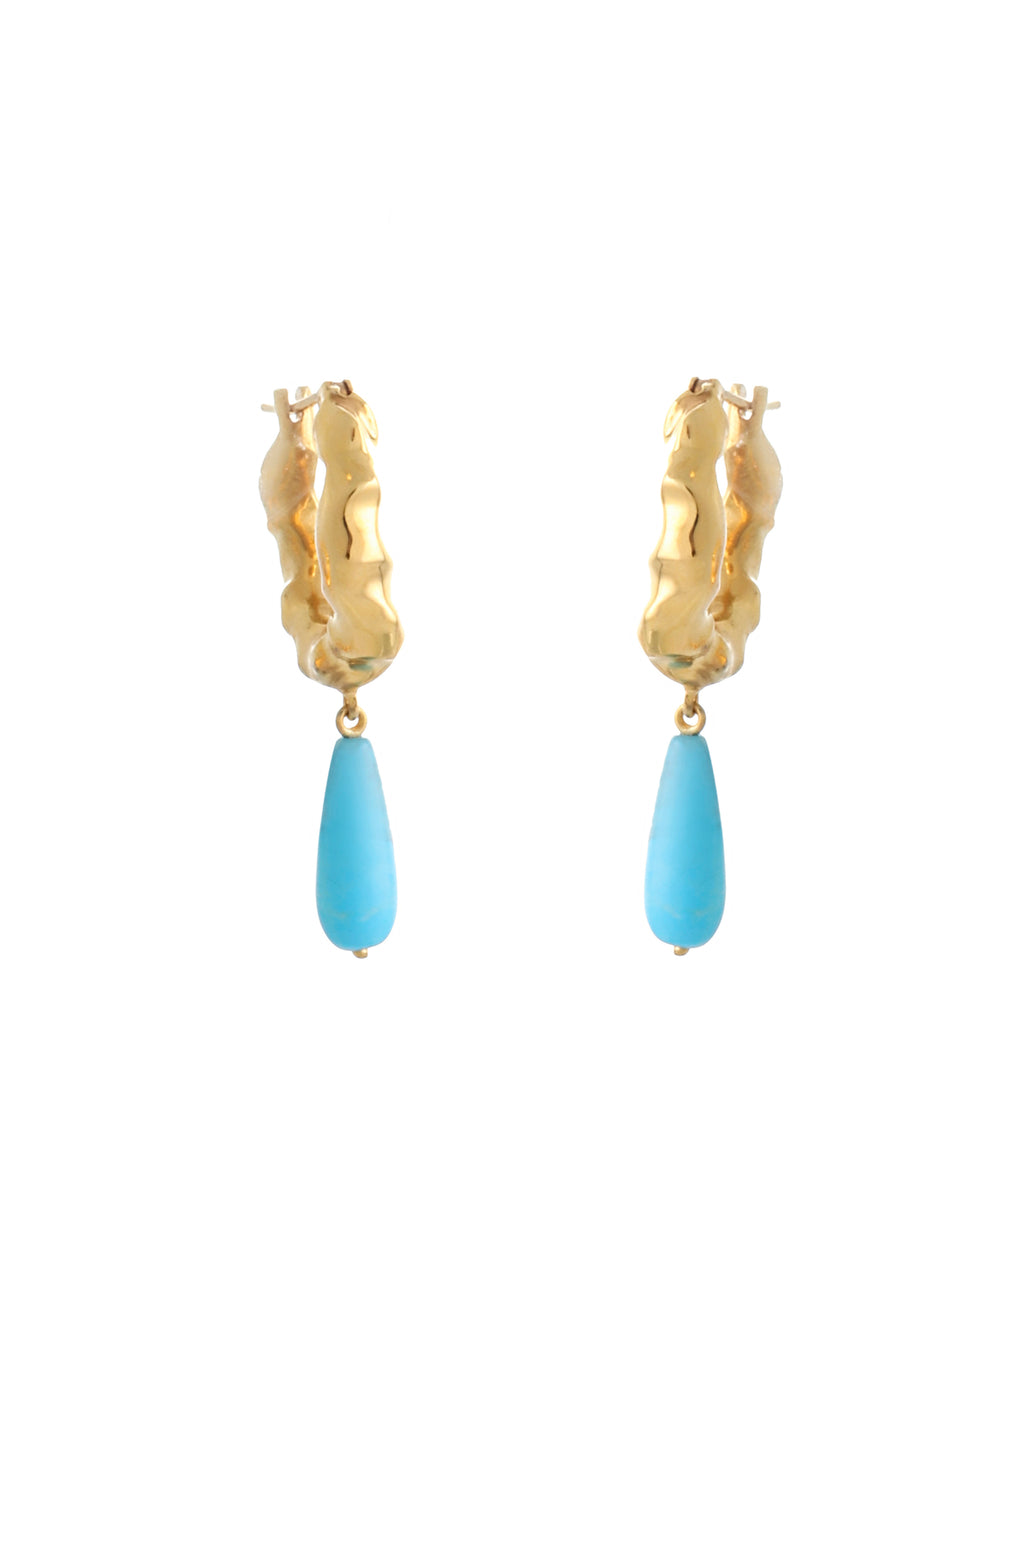 WAVE HOOP EARRINGS WITH TURQUOISE DROPS